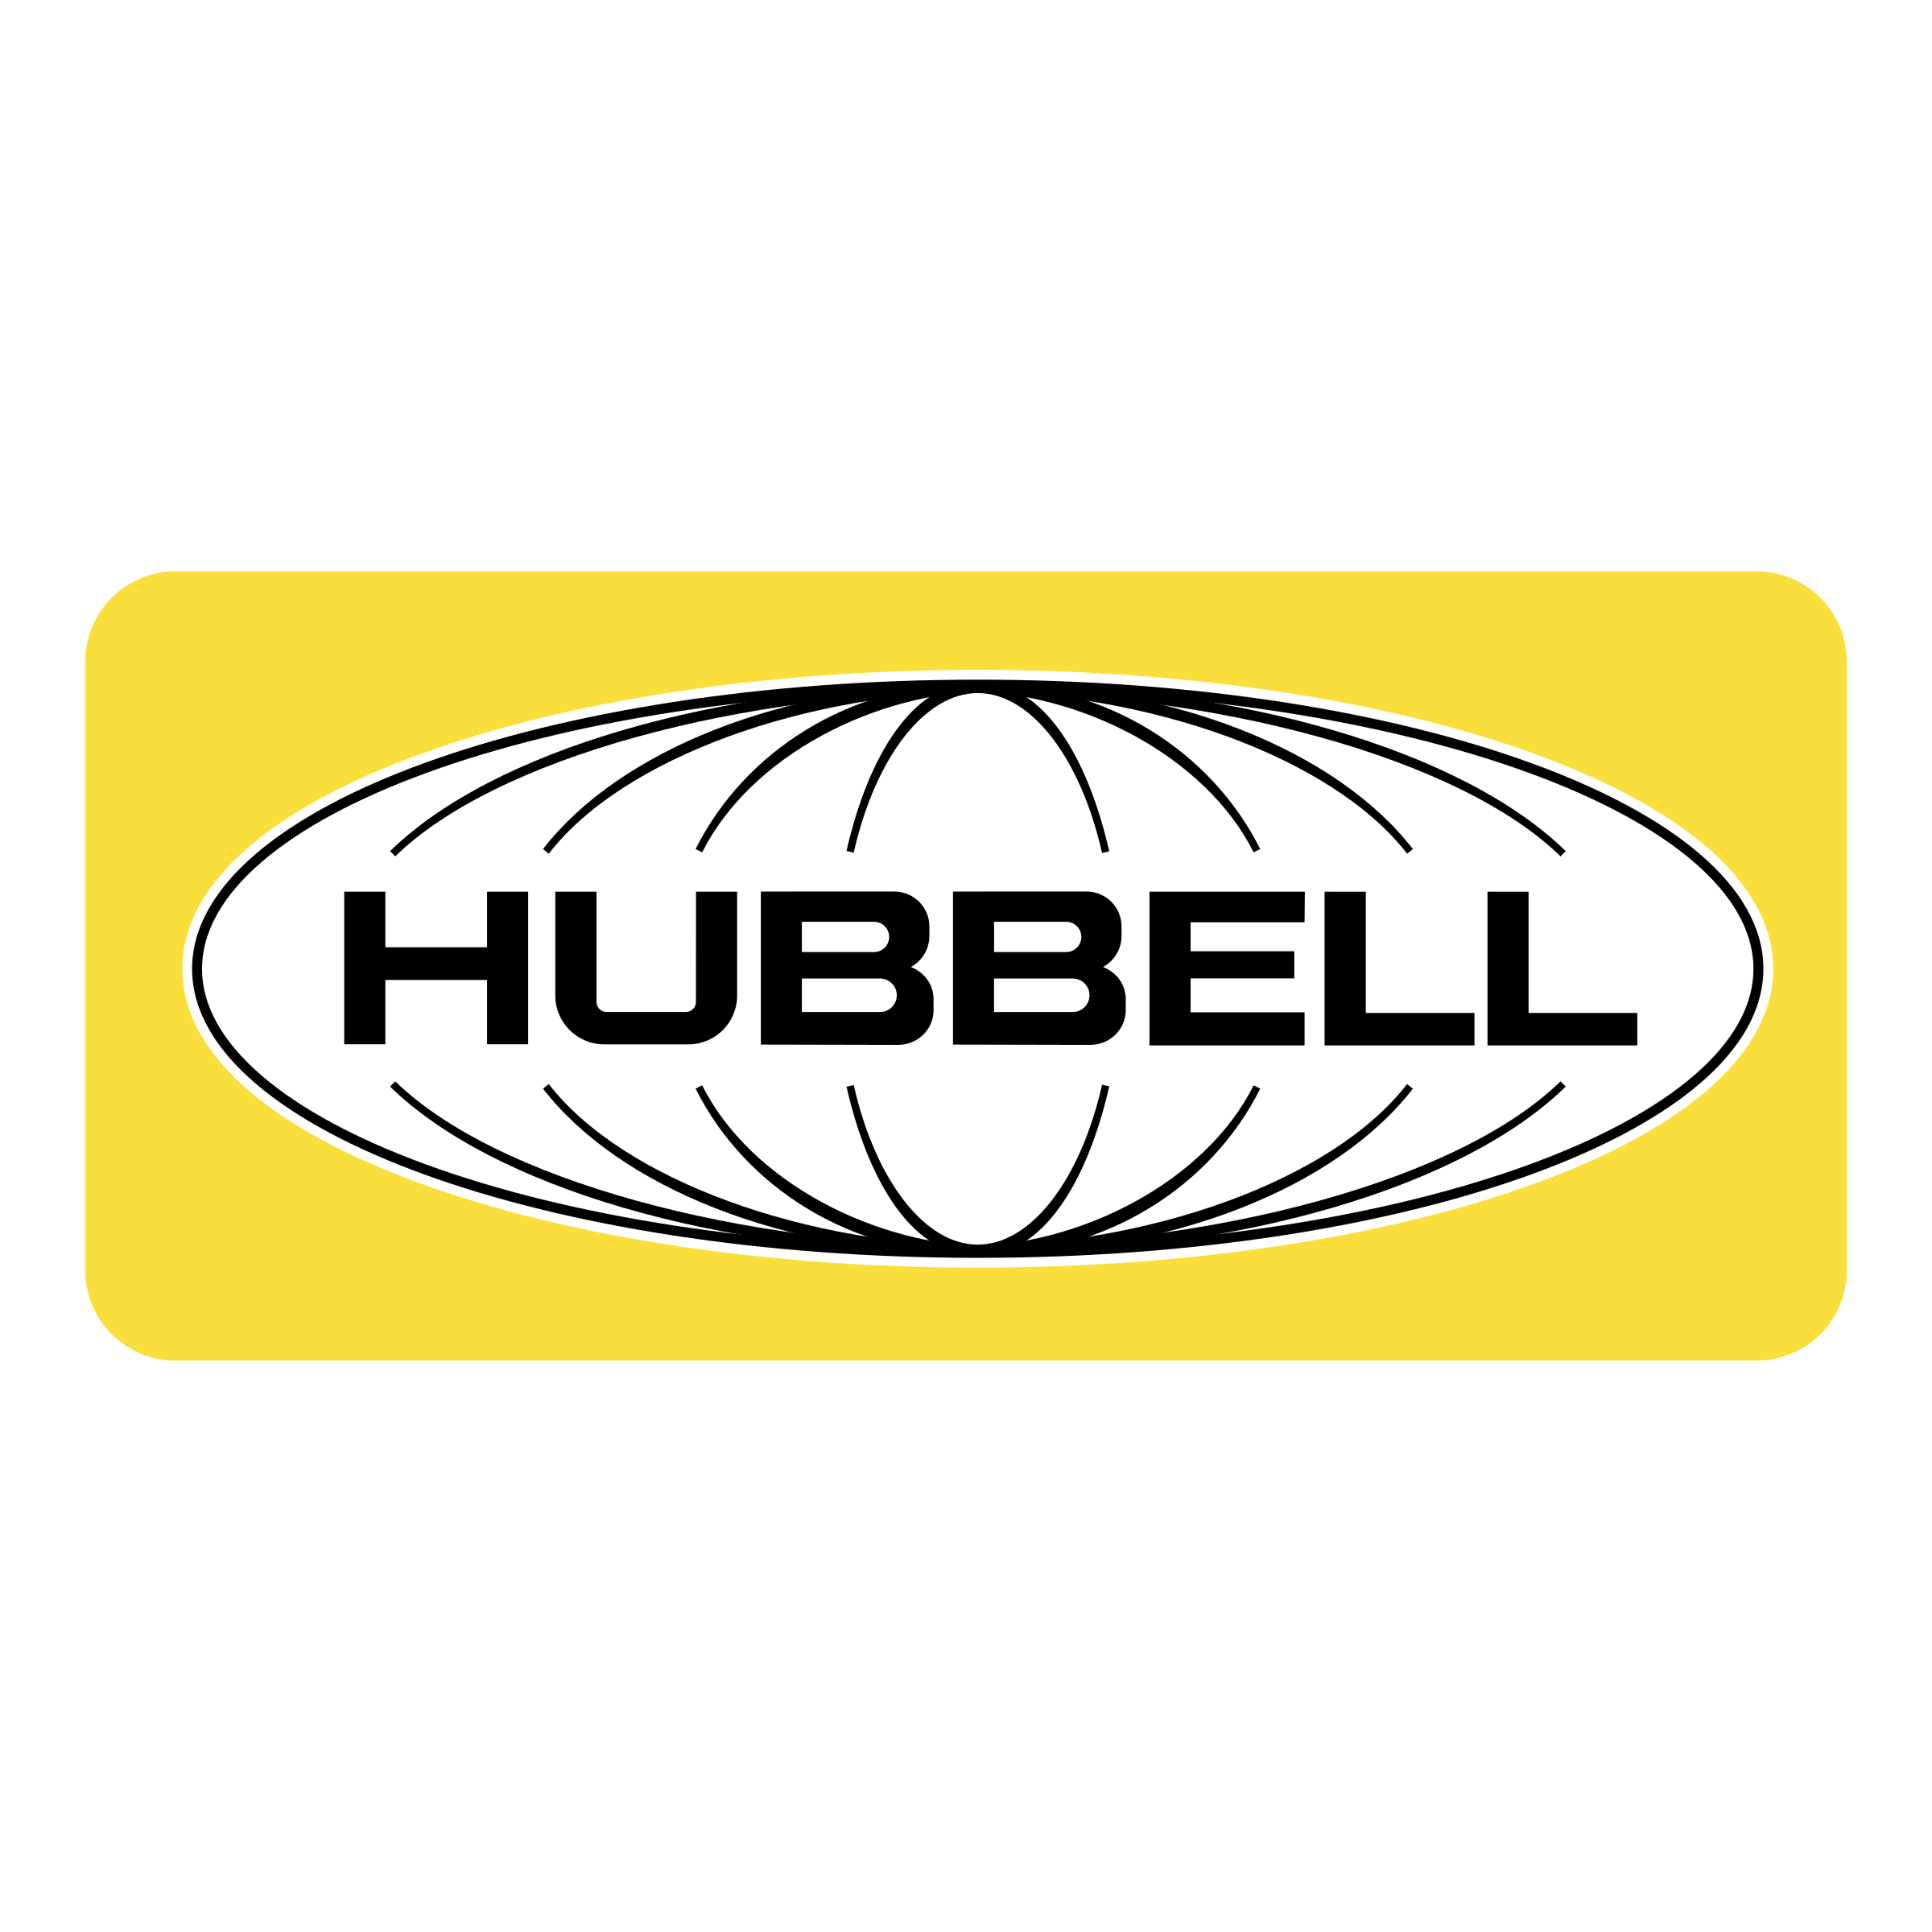 Hubbell Logo - Hubbell Logo PNG Transparent & SVG Vector